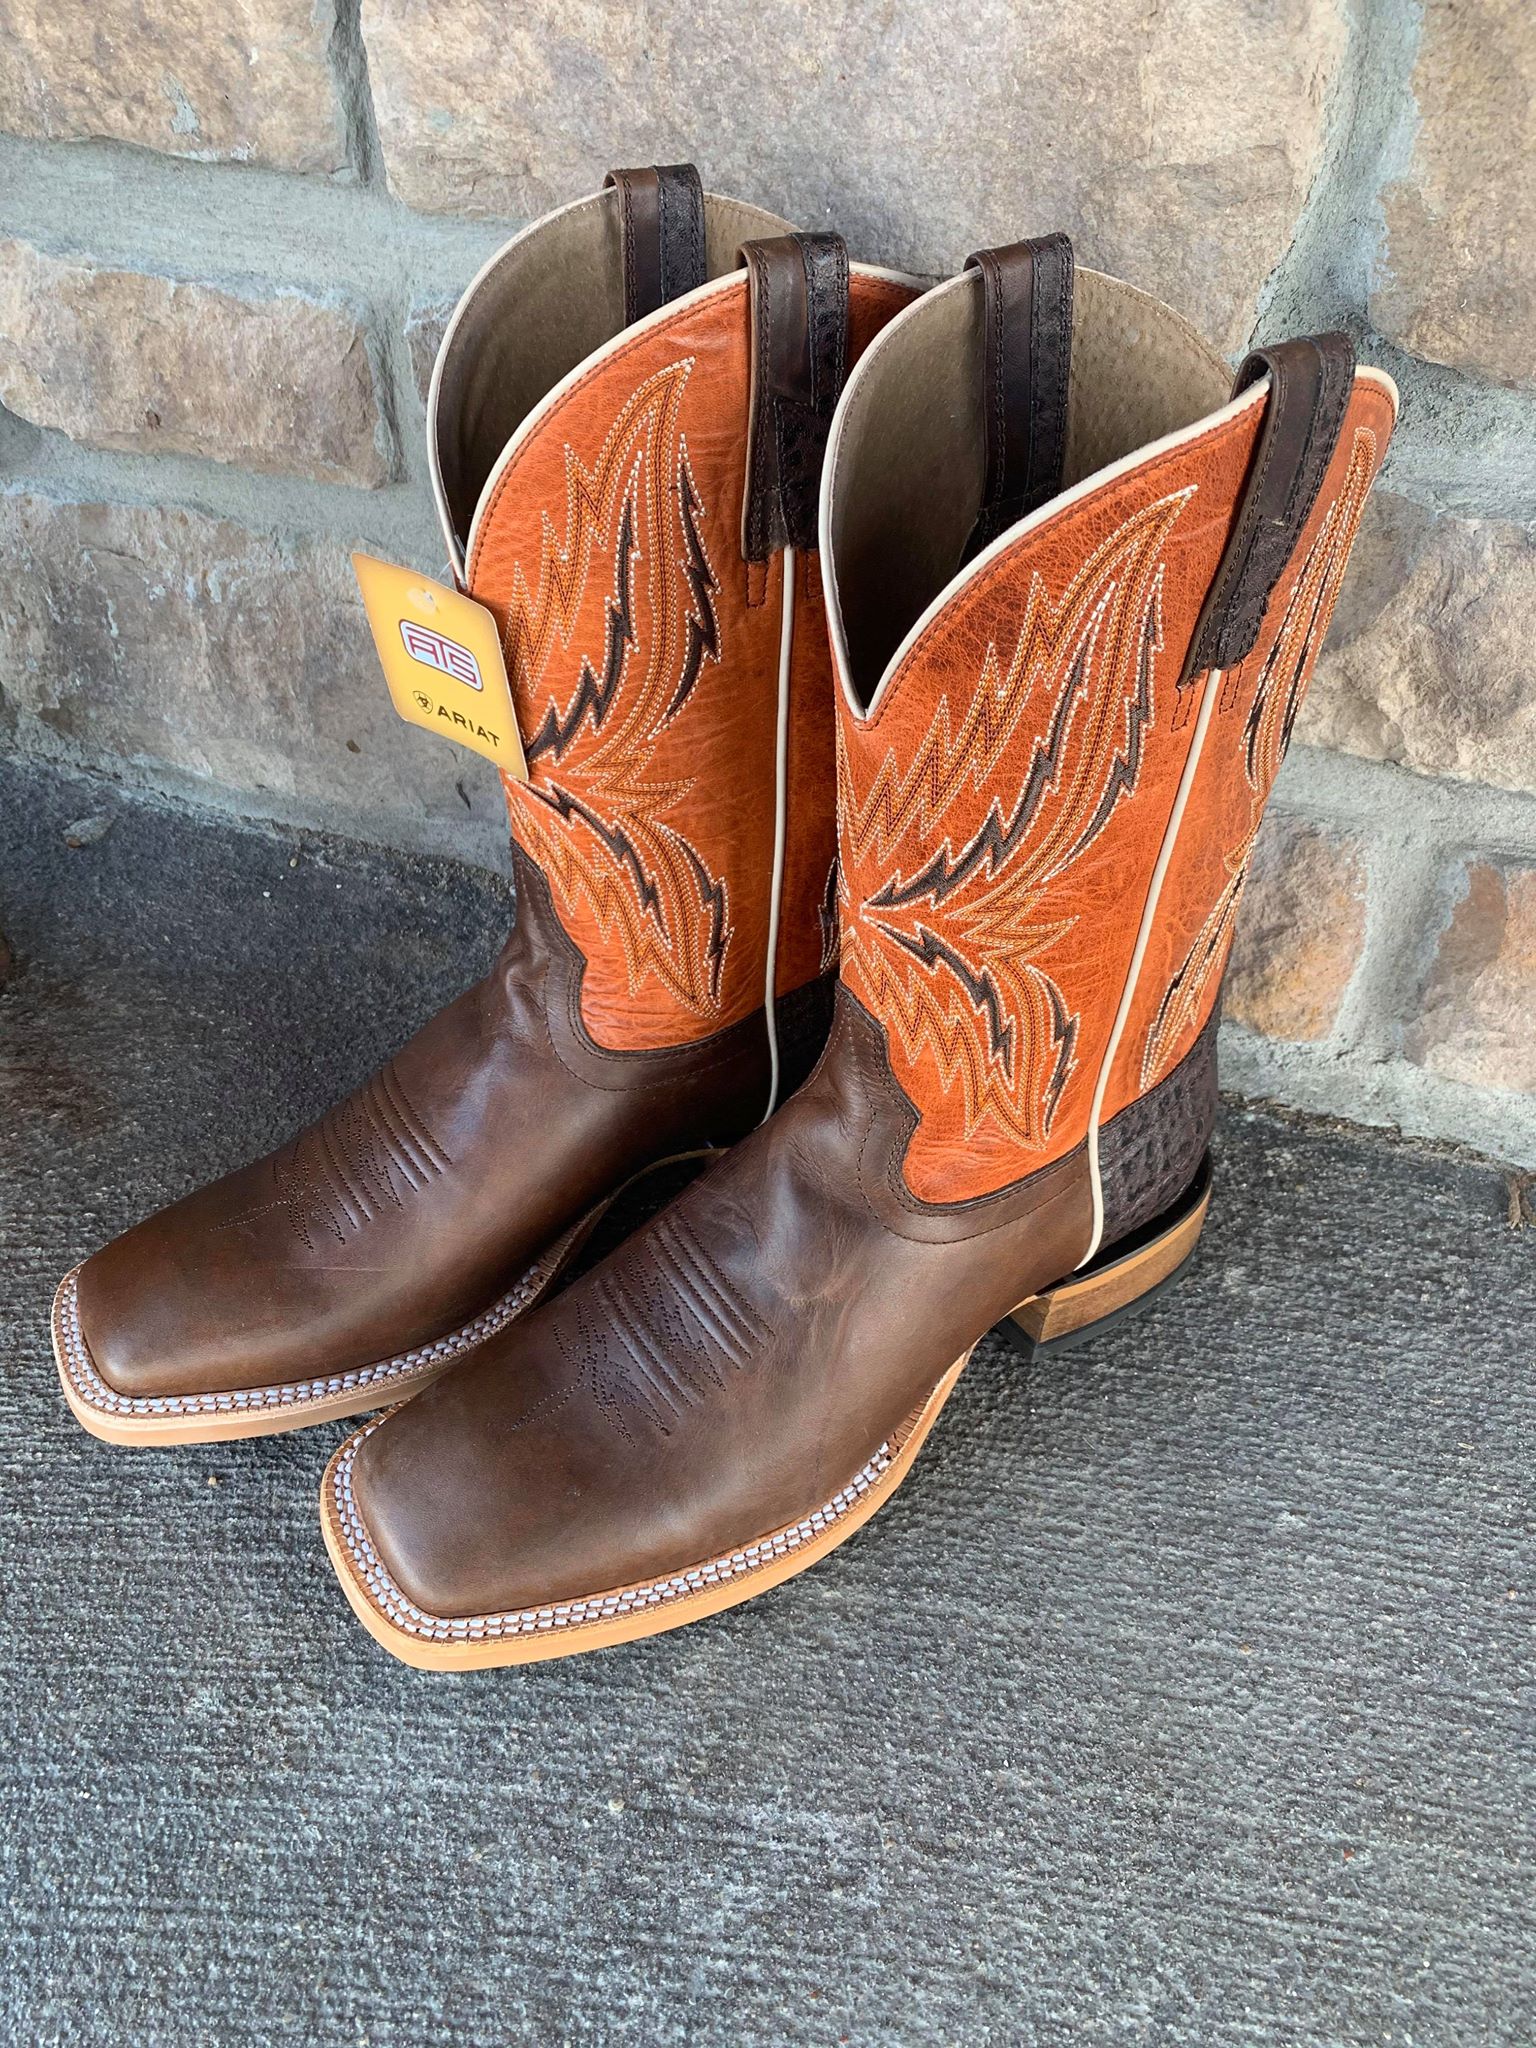 Men's Ariat Arena Rebound Boot in Chocolate/Rave Orange-Men's Boots-Ariat-Lucky J Boots & More, Women's, Men's, & Kids Western Store Located in Carthage, MO